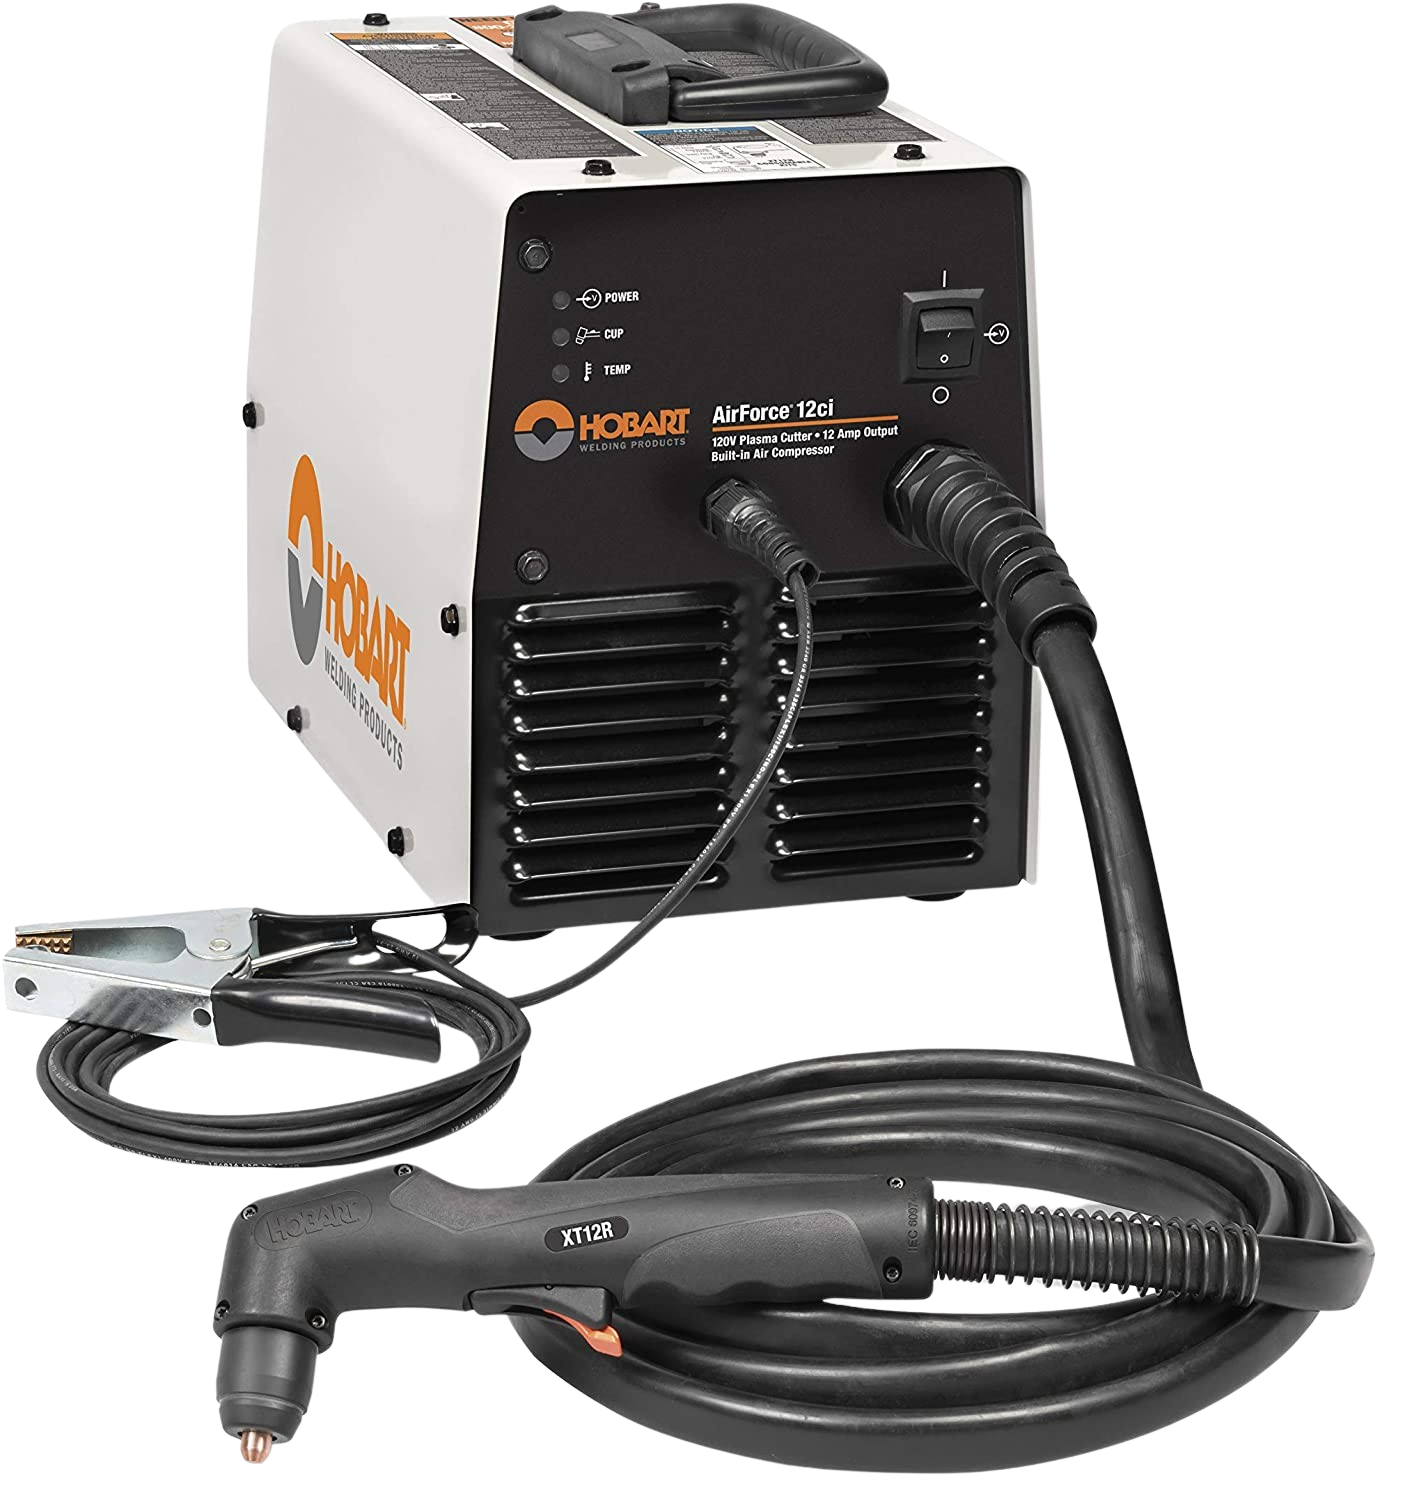 Hobart, Hobart 500564 Airforce 12ci Plasma Cutter with Built-In Air Compressor 120V New